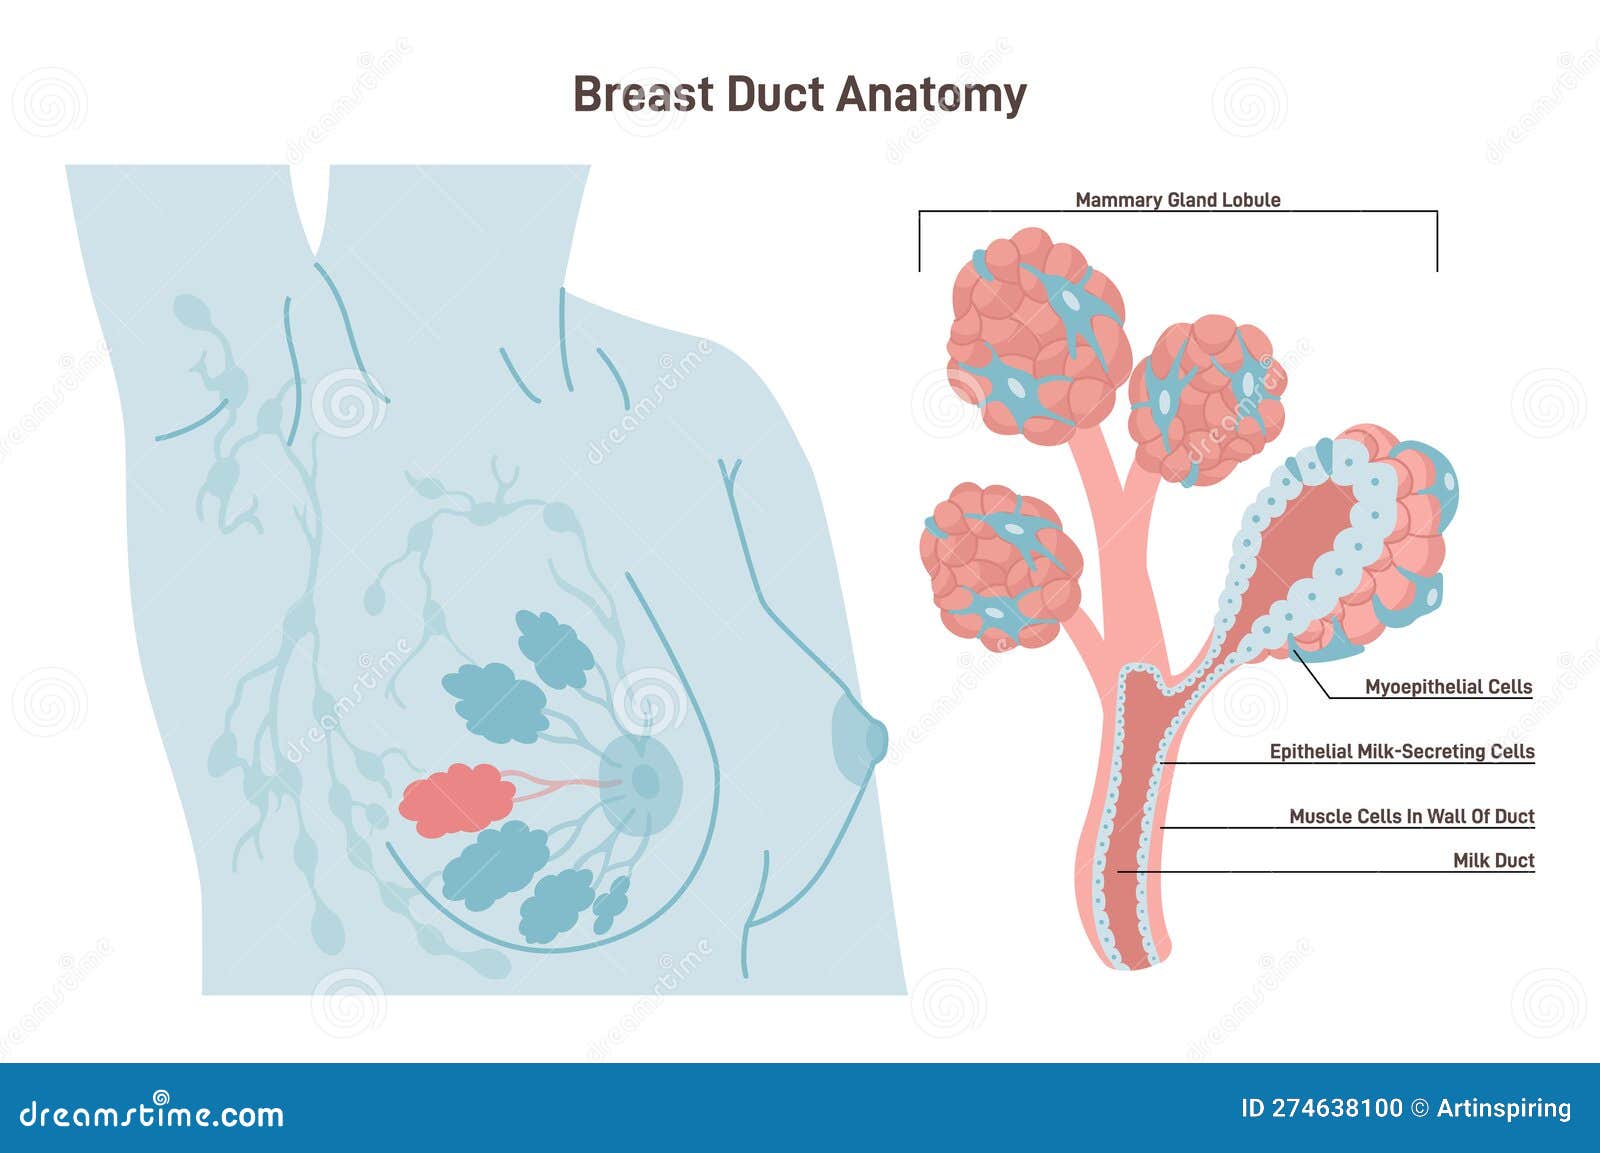 Anatomy of the Female Breast. Mammary Gland Duct and Lobule